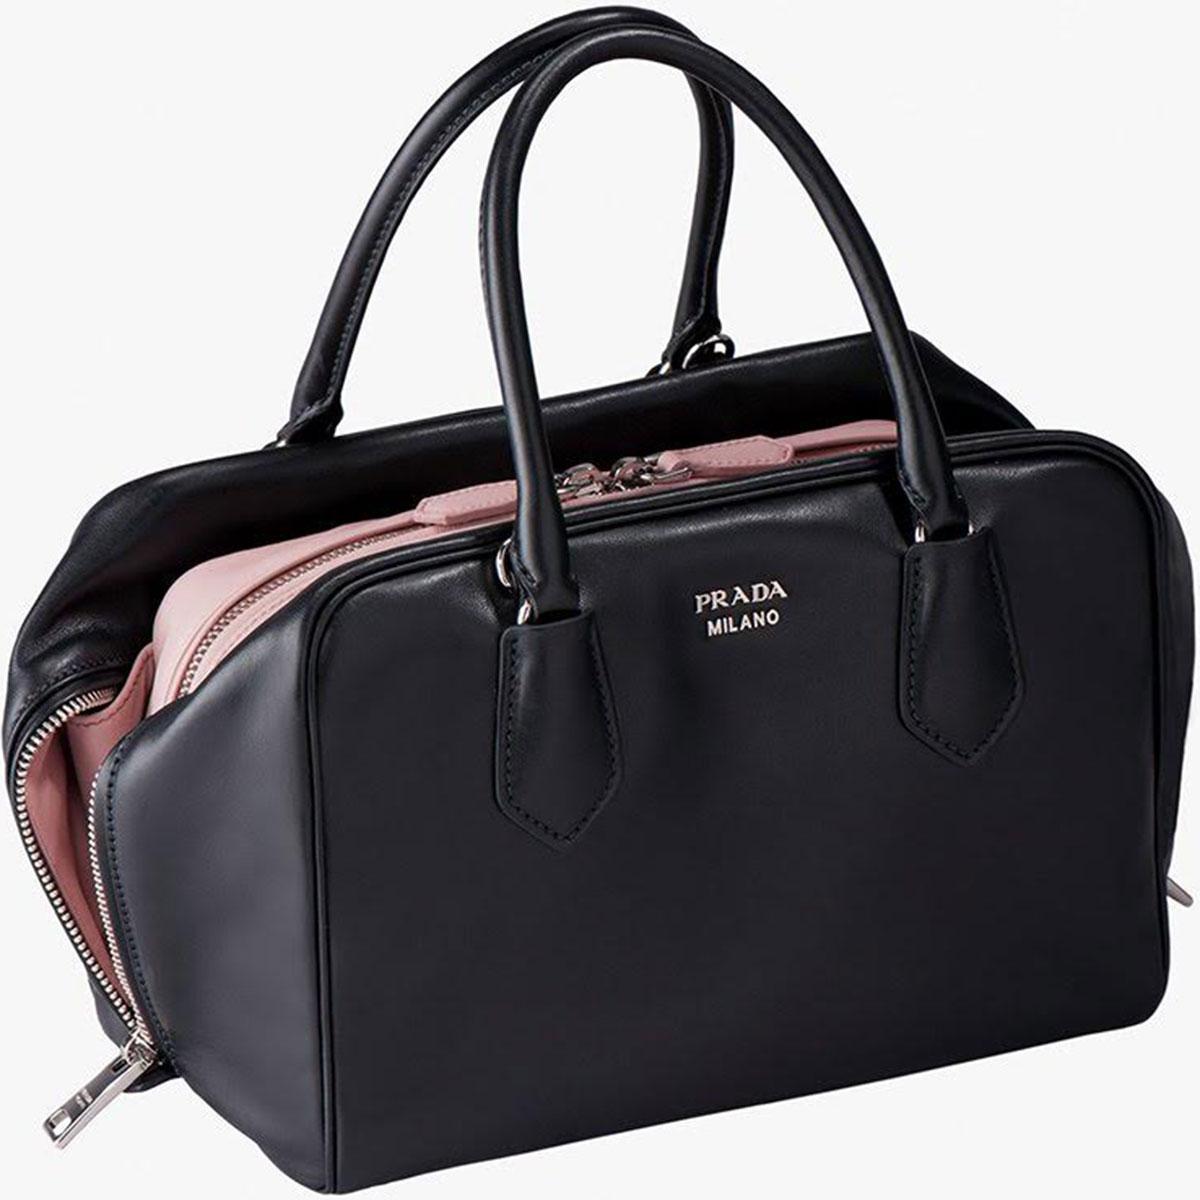 100% authentic Prada Medium Inside bag in black smooth leather with a dirty rose leather inside bag and lining. The inner bag is joined through two folds to the outer, without any internal frame. Each section is handcrafted, which takes many hours